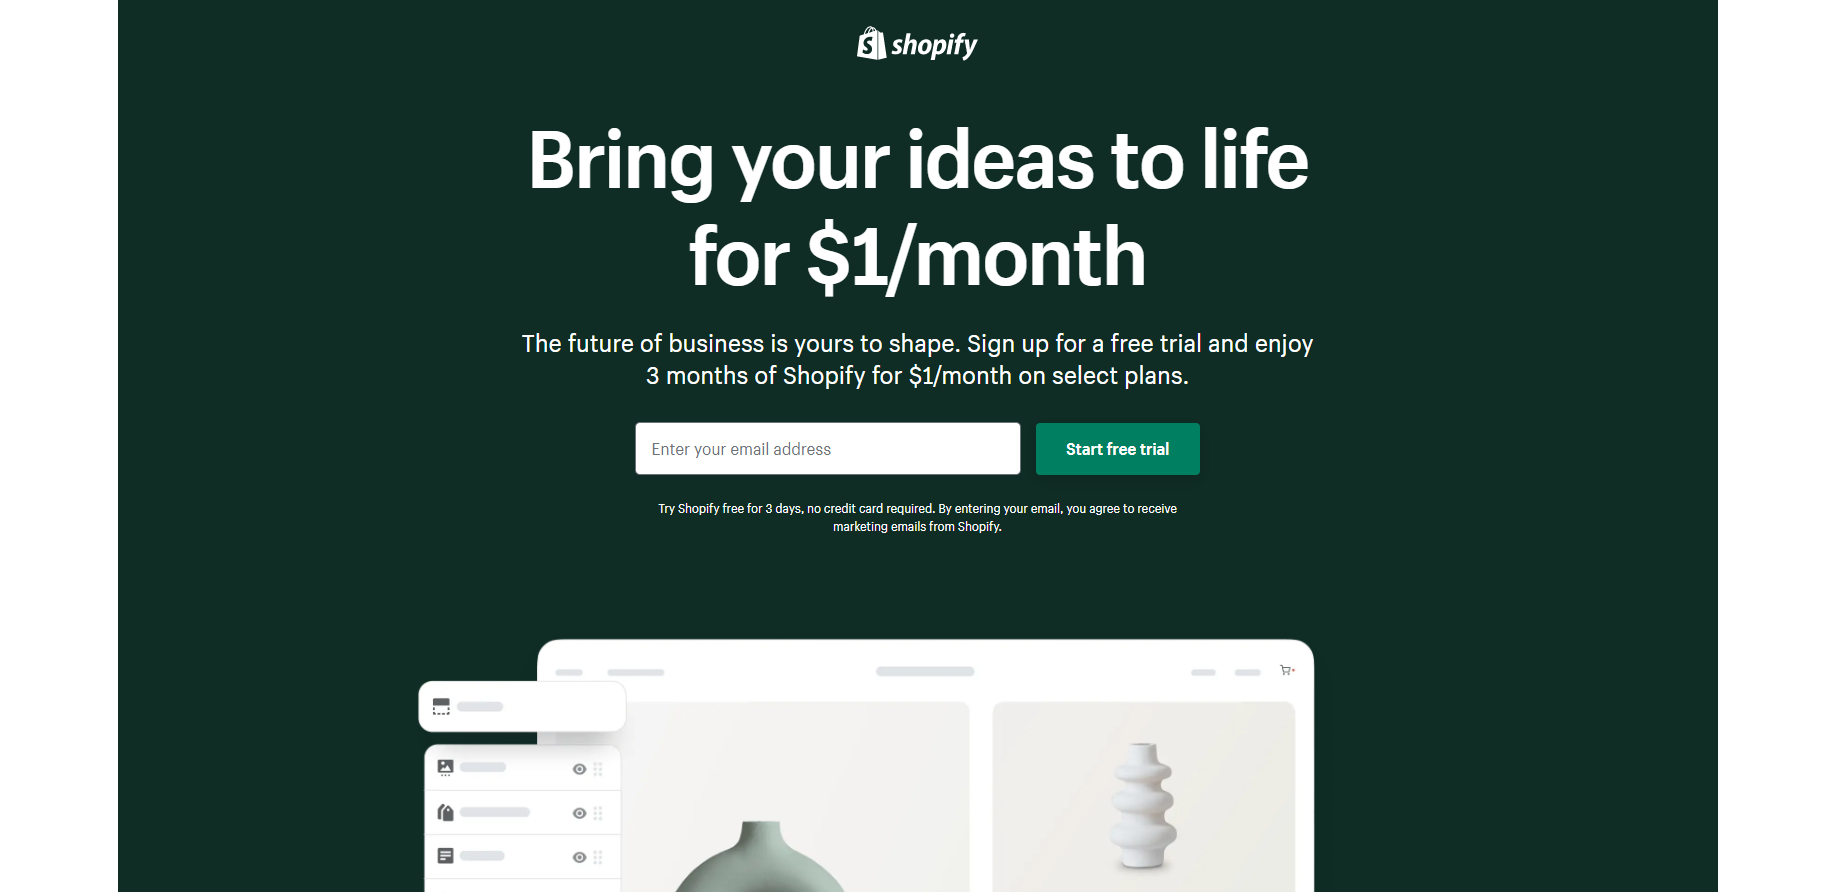 Use Shopify for $1/month